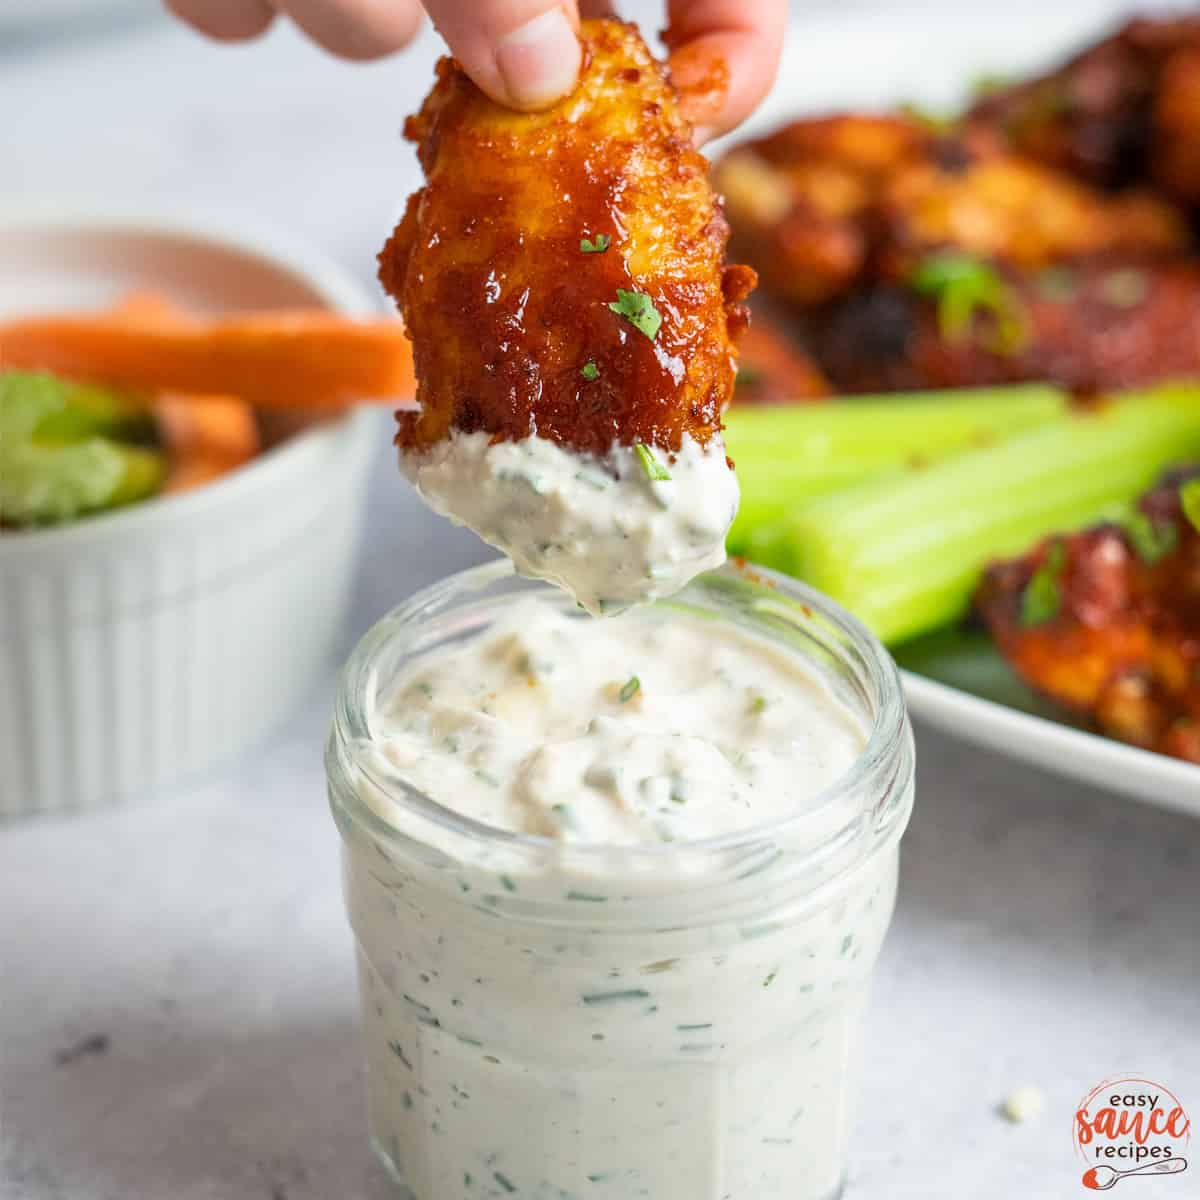 blue cheese with a wing dipping inside